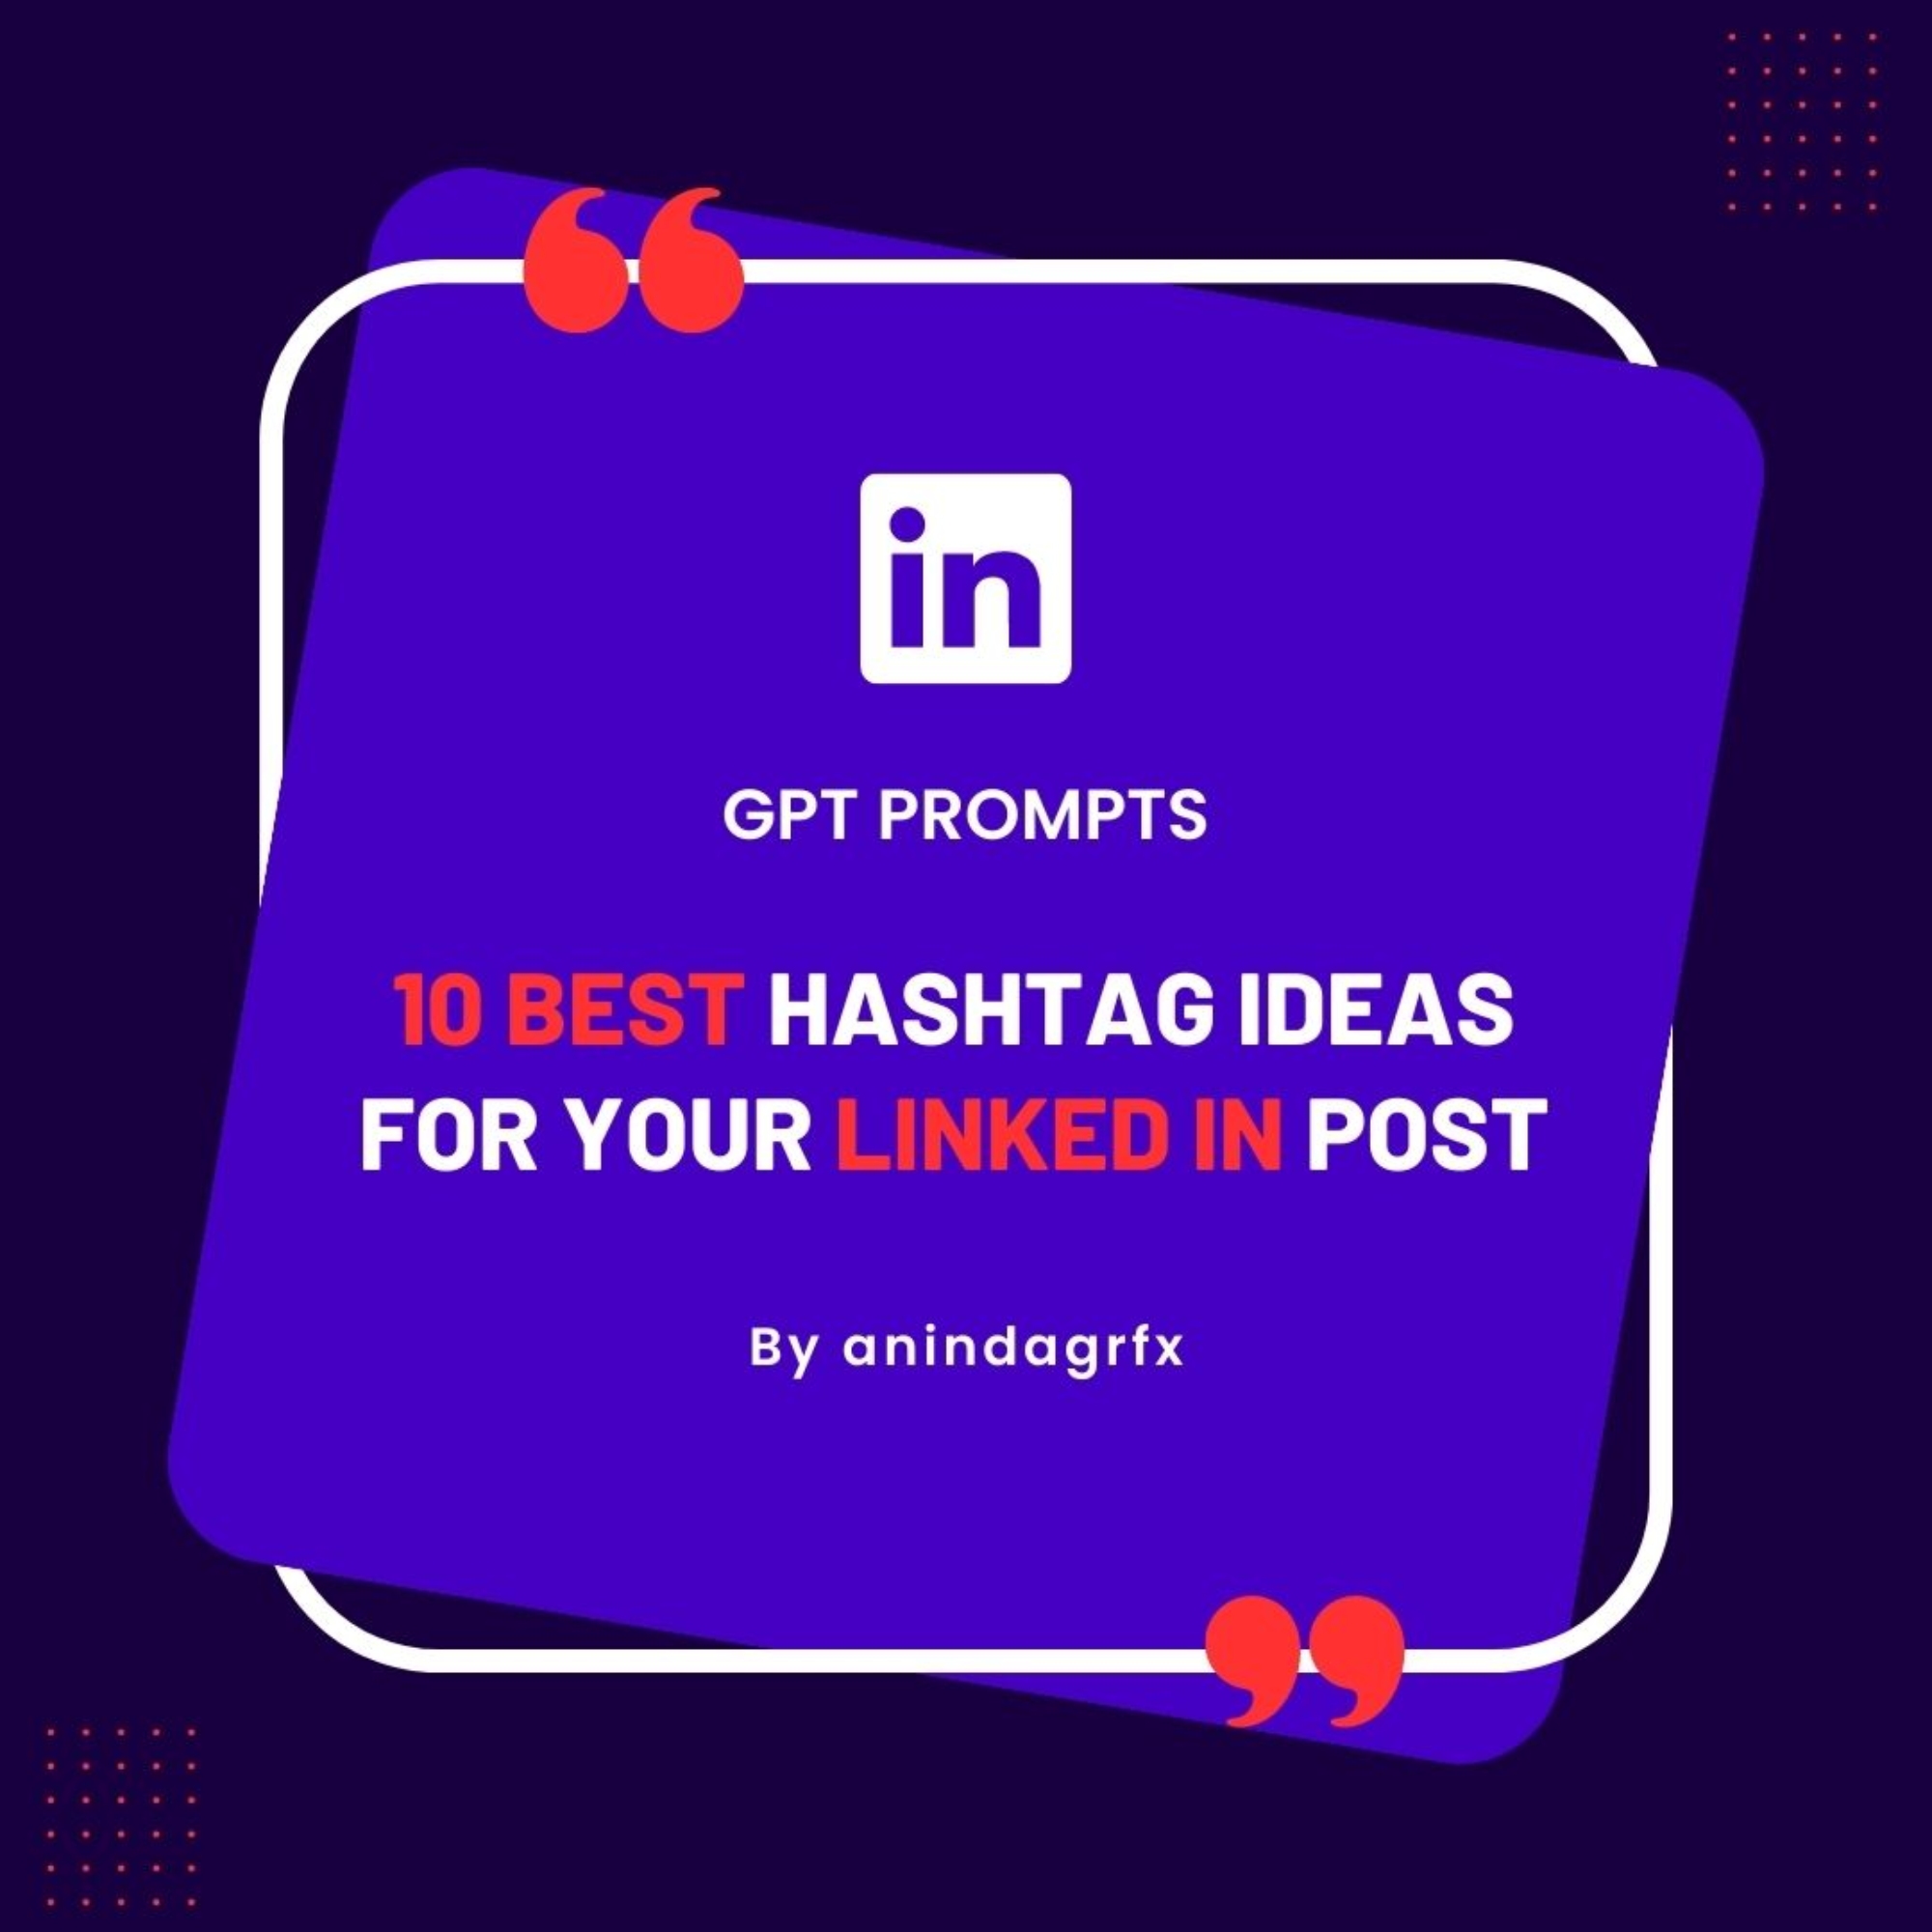 10 Best hashtag research ideas for you linked in post GPT Prompts cover image.